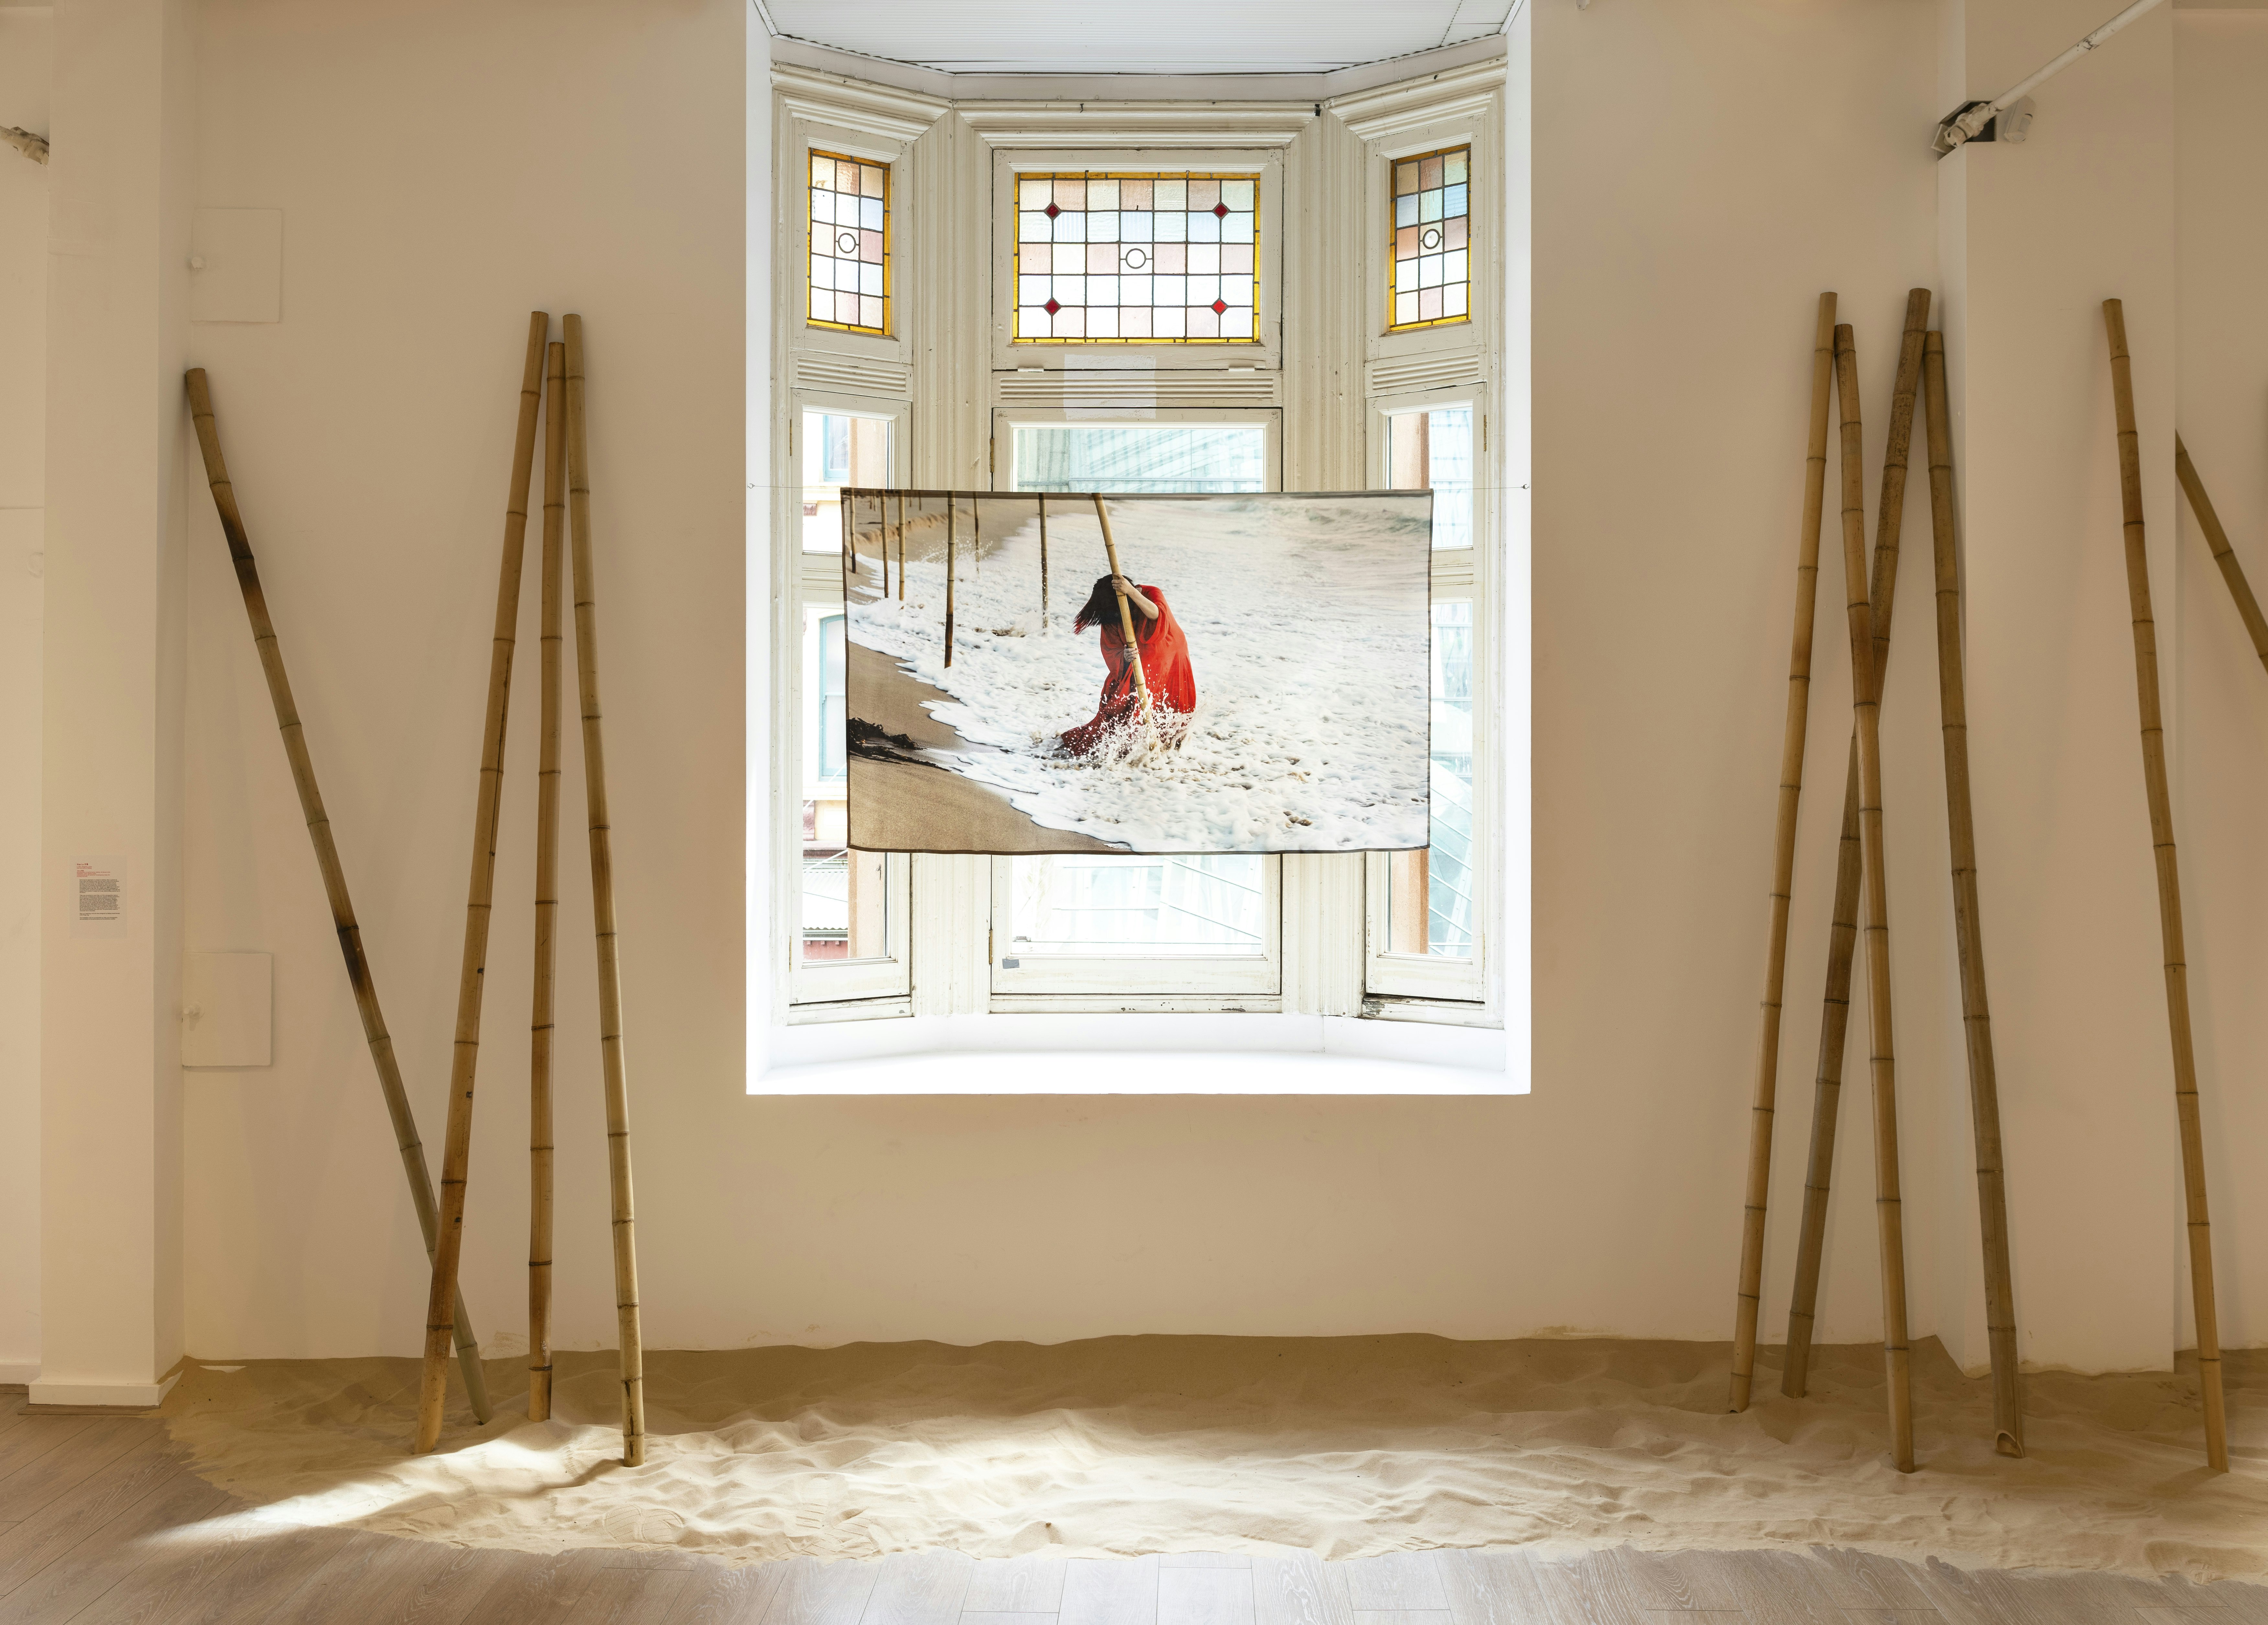 A video screen showing a female-presenting figure in a red dress standing knee-deep in the ocean grasping a bamboo pole in both of her hands. The screen is suspended in front of some stained glass windows, with several bamboo poles standing upright on each side of the windows.